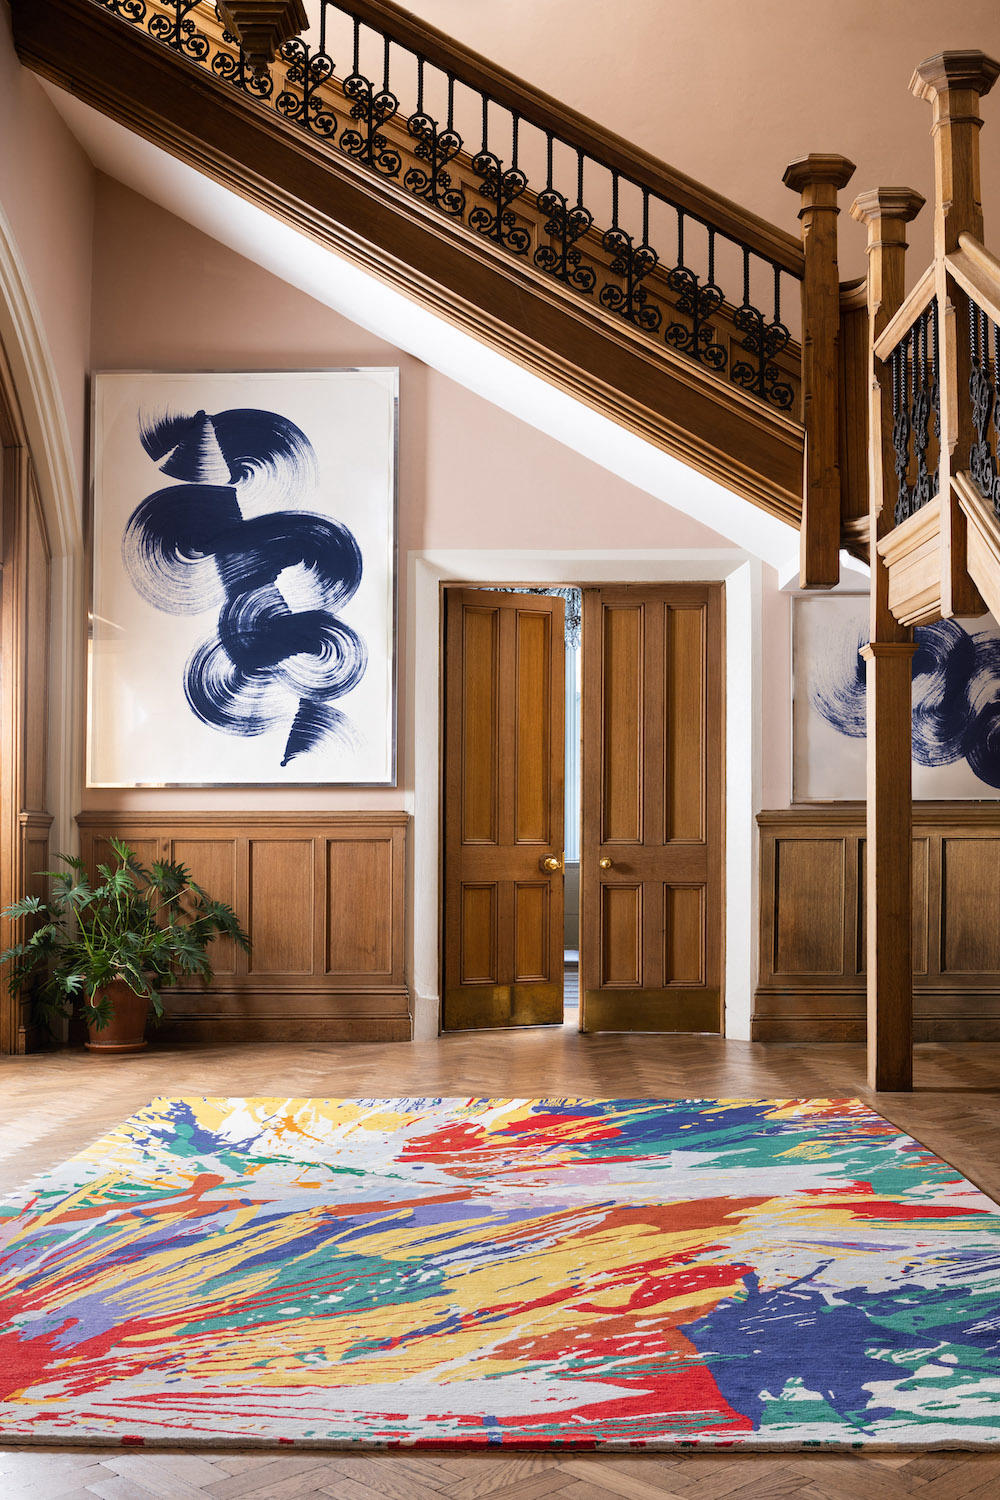 Must-see releases from Arteriors, Mary Katrantzou for The Rug Company, and more